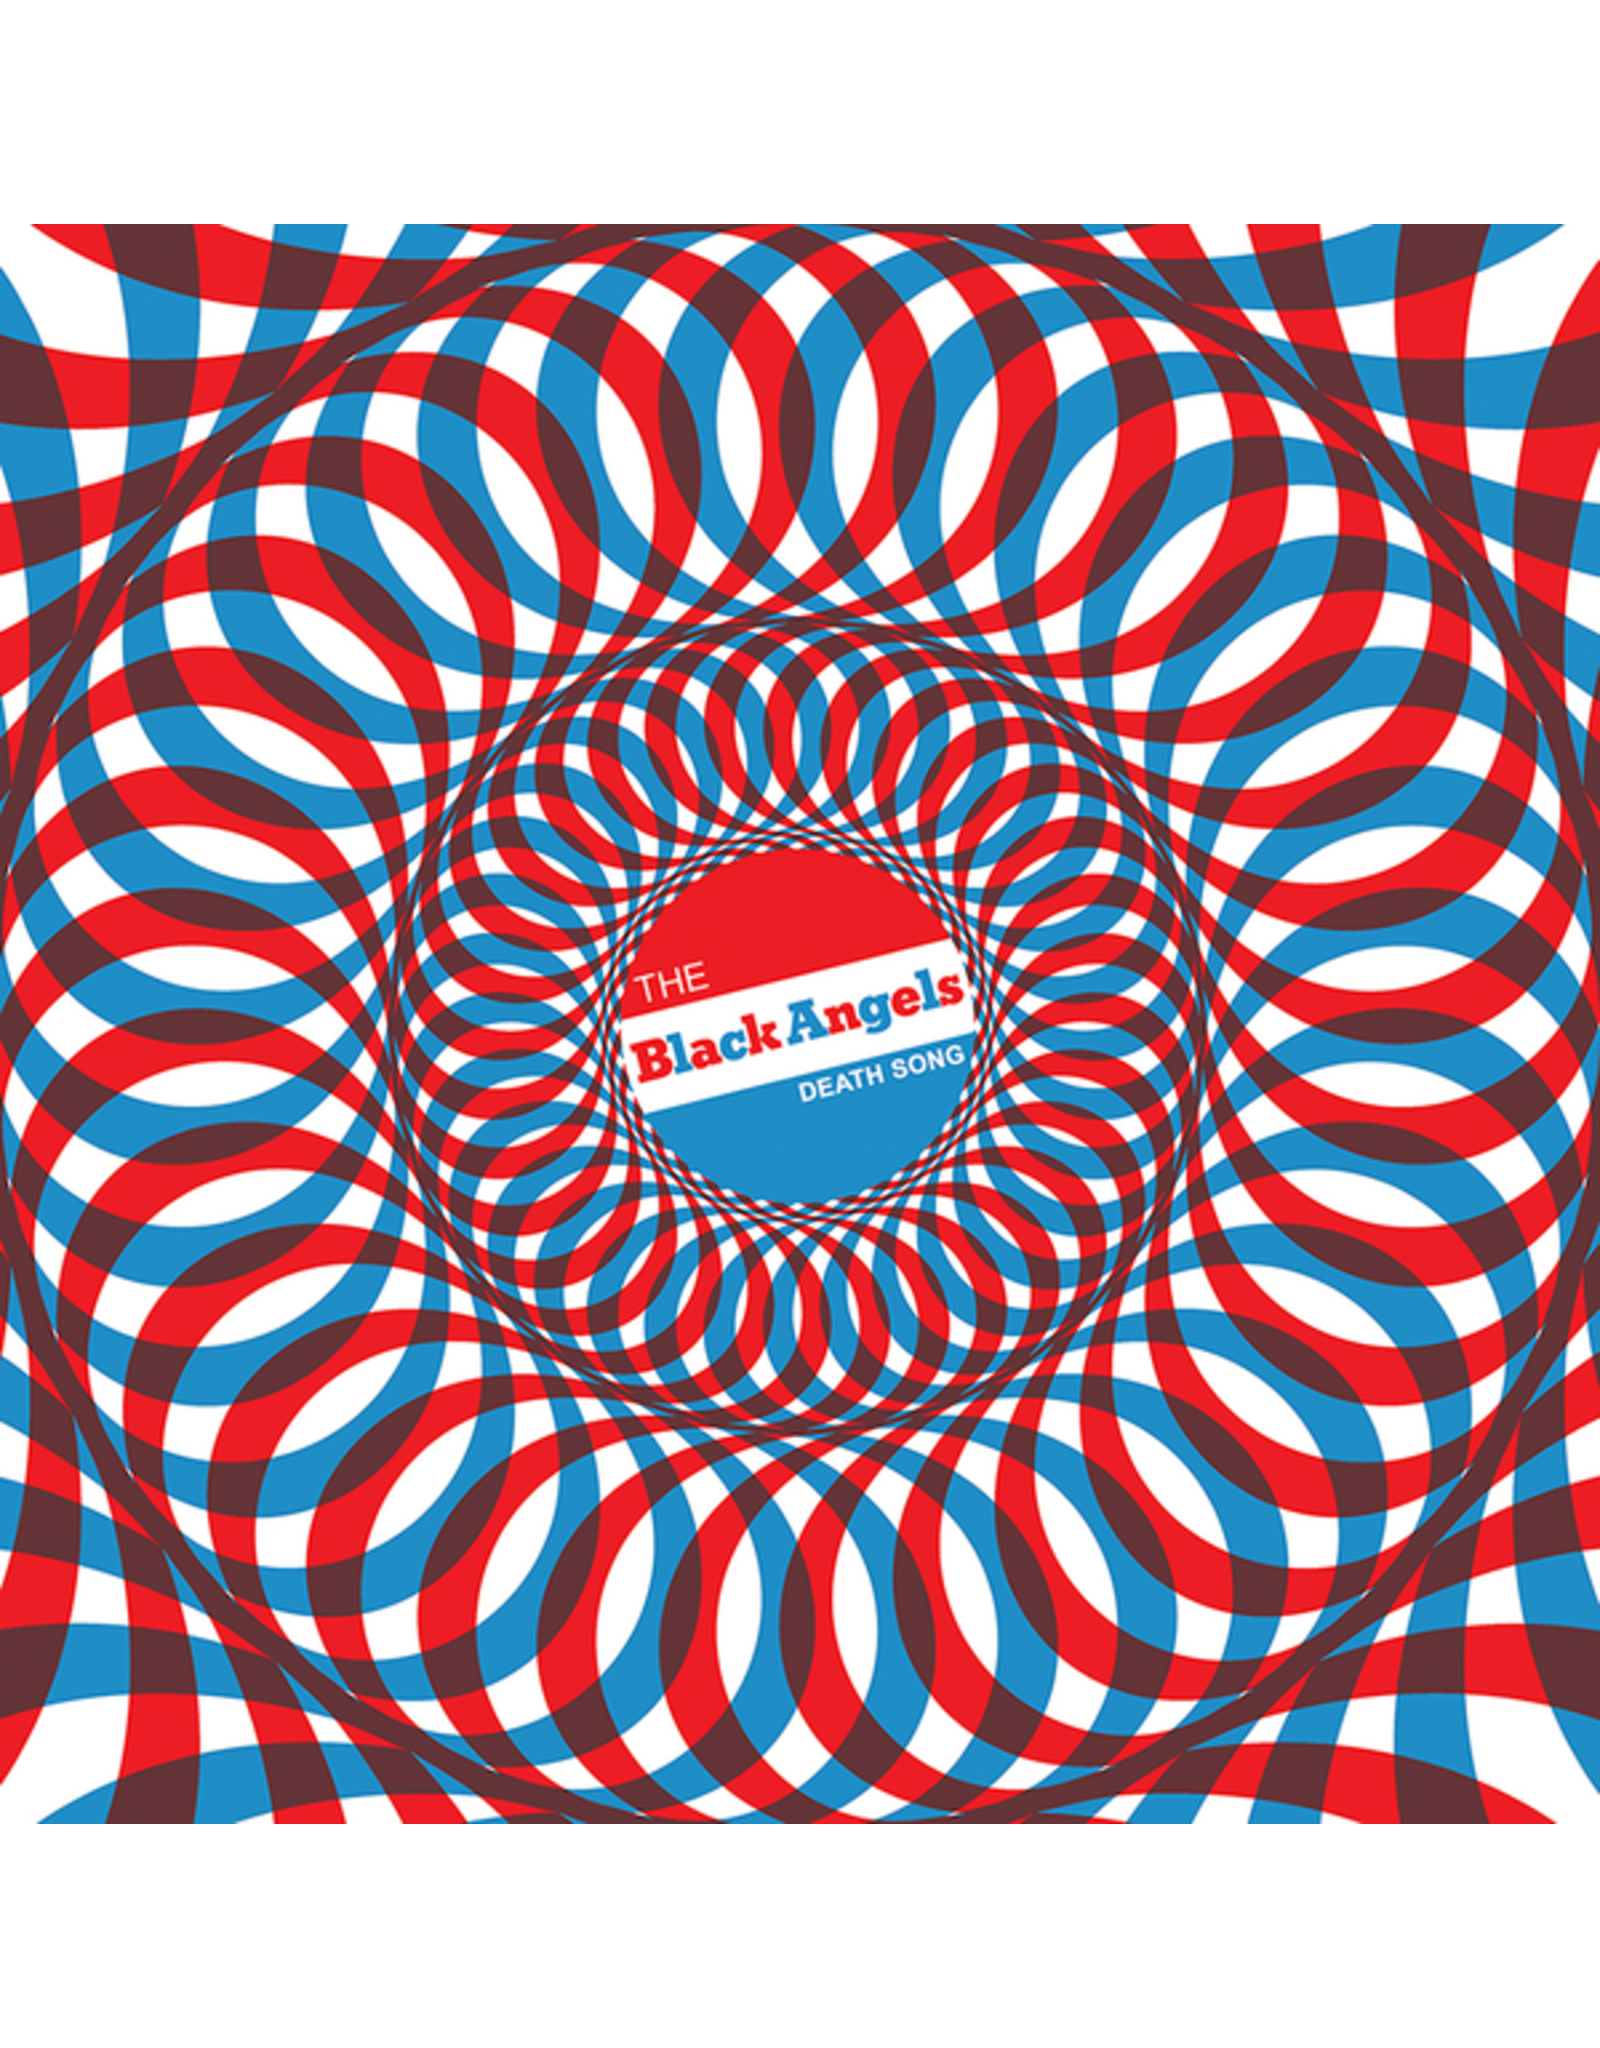 Black Angels - Death Song (Deluxe Edition)